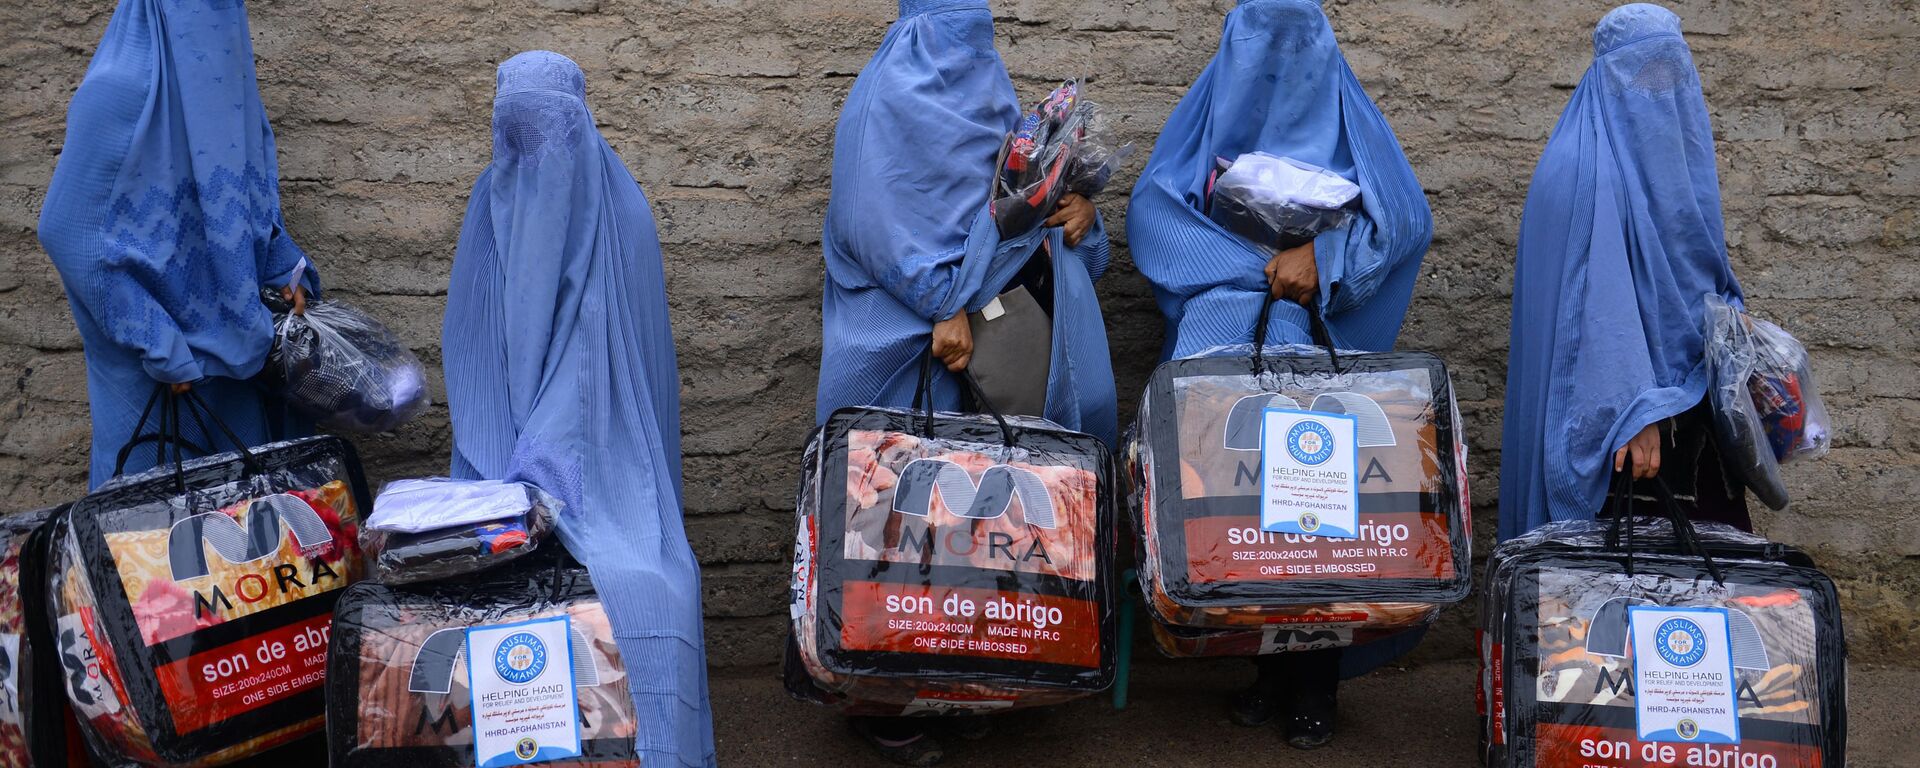 In this photograph taken on December 19, 2019, Afghan burqa-clad women stand with aid items recieved from a charity in Herat. - Sputnik International, 1920, 10.07.2021